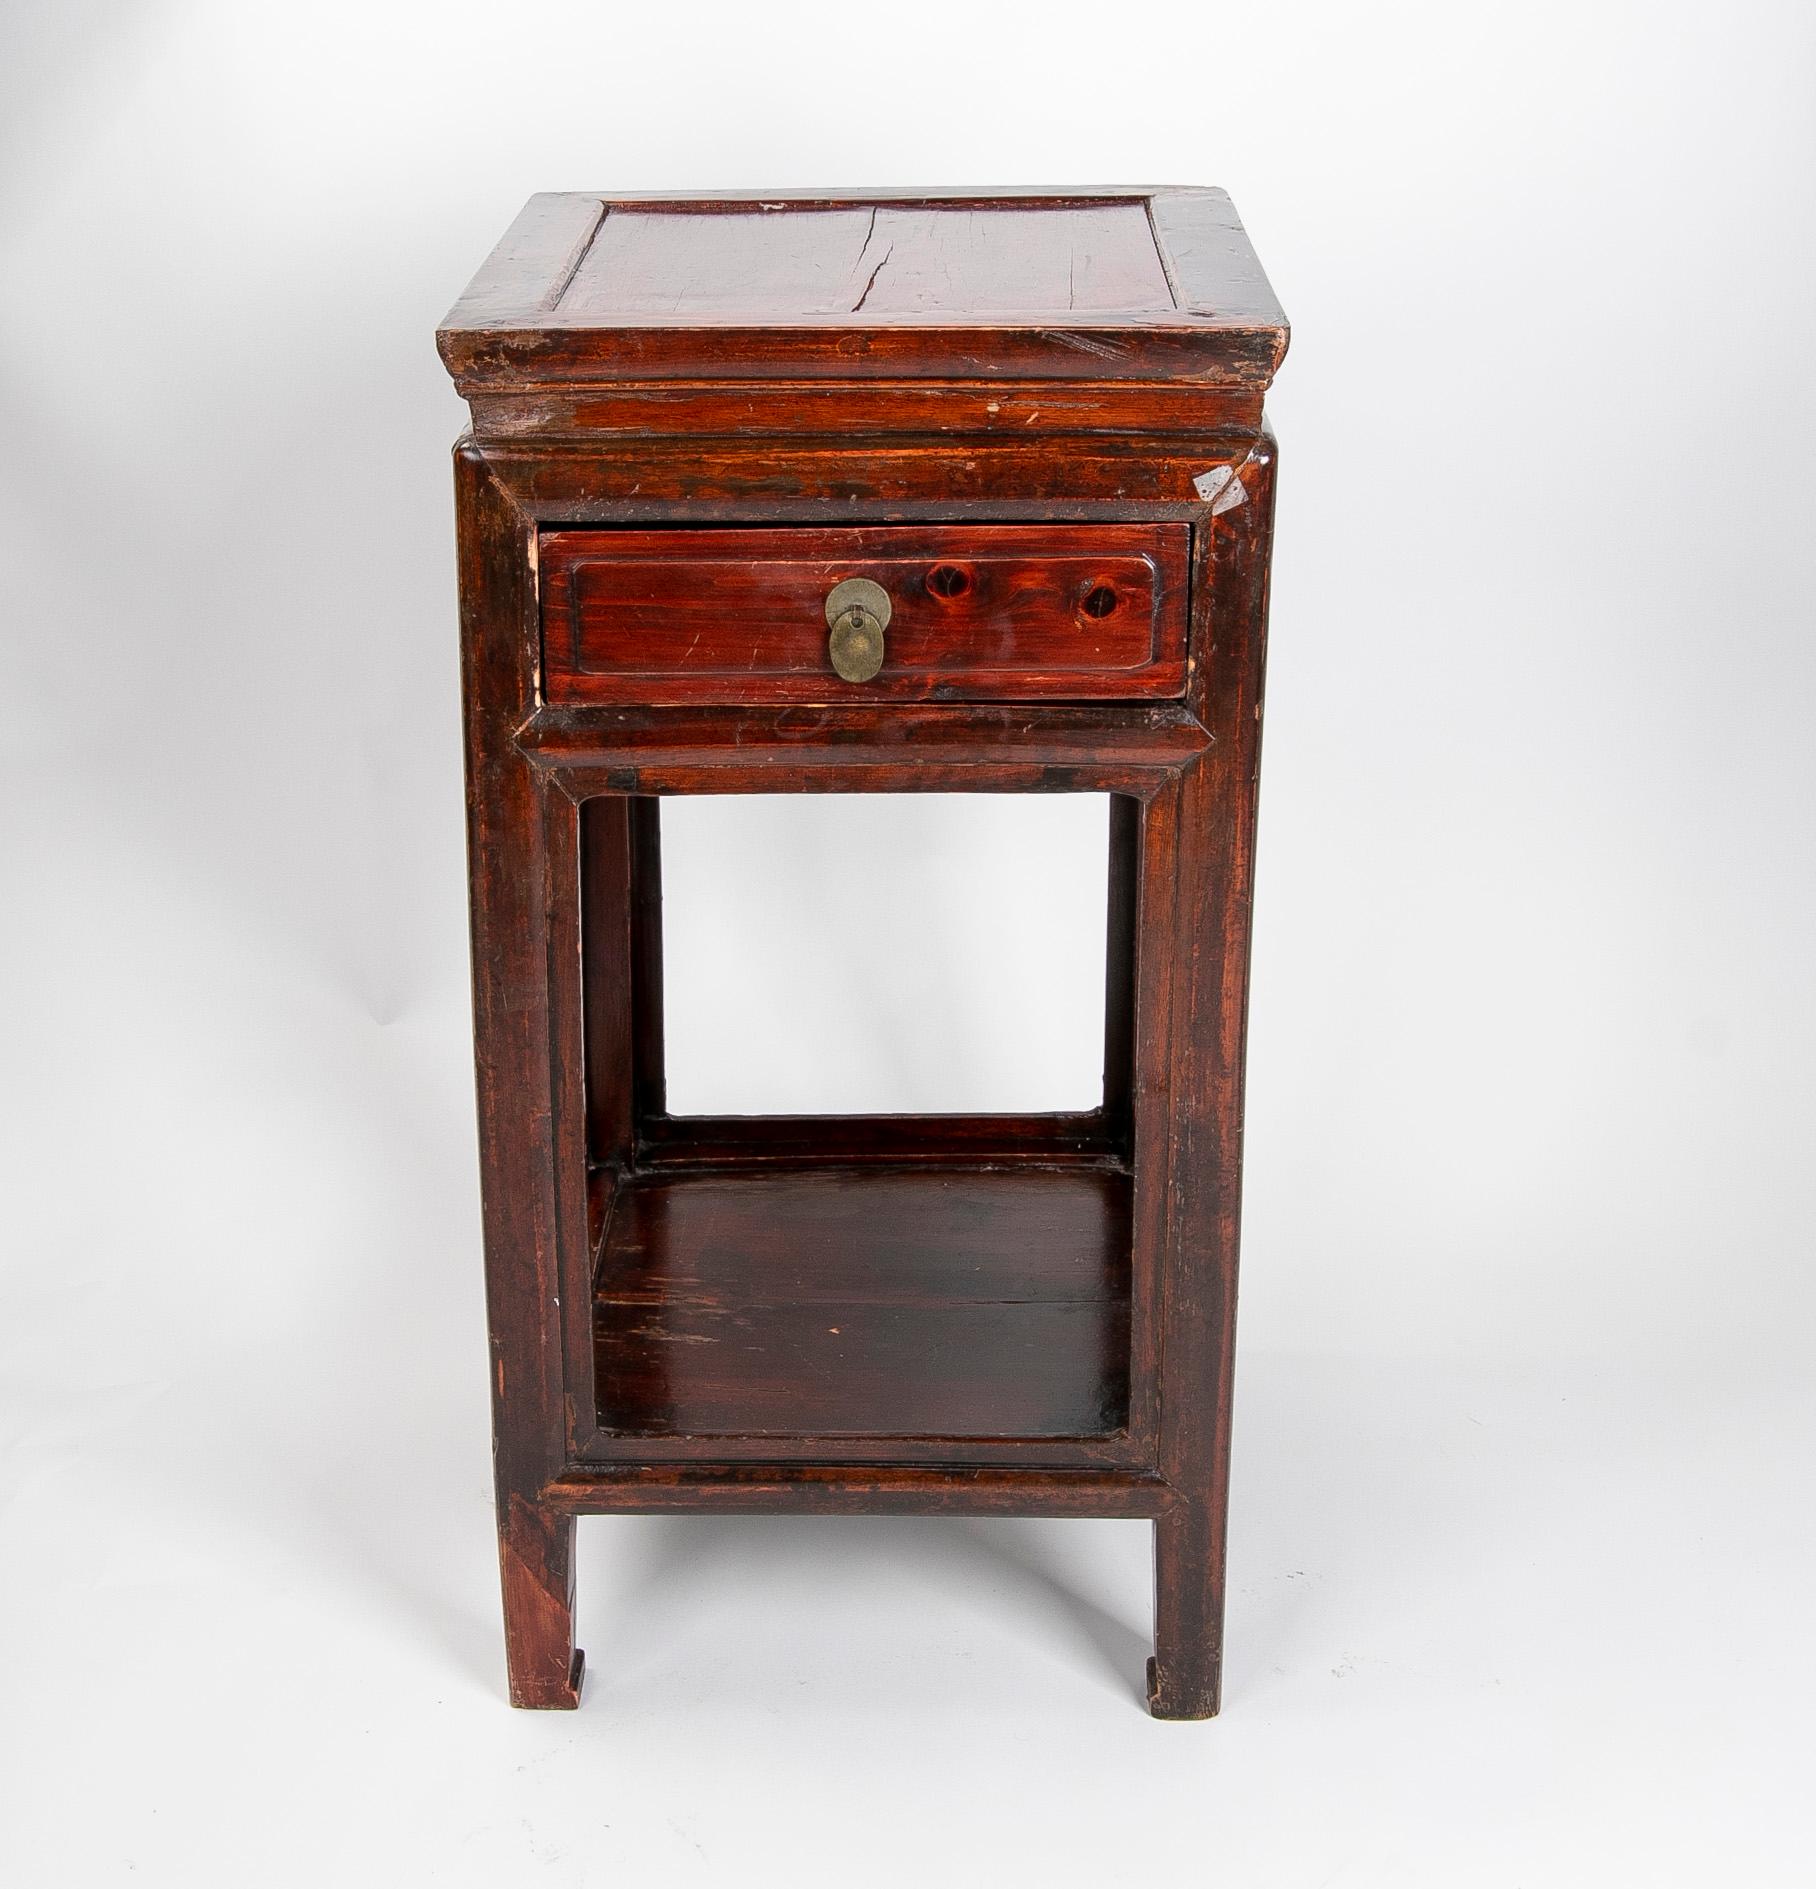 Wooden side table with drawer and inlaid front.